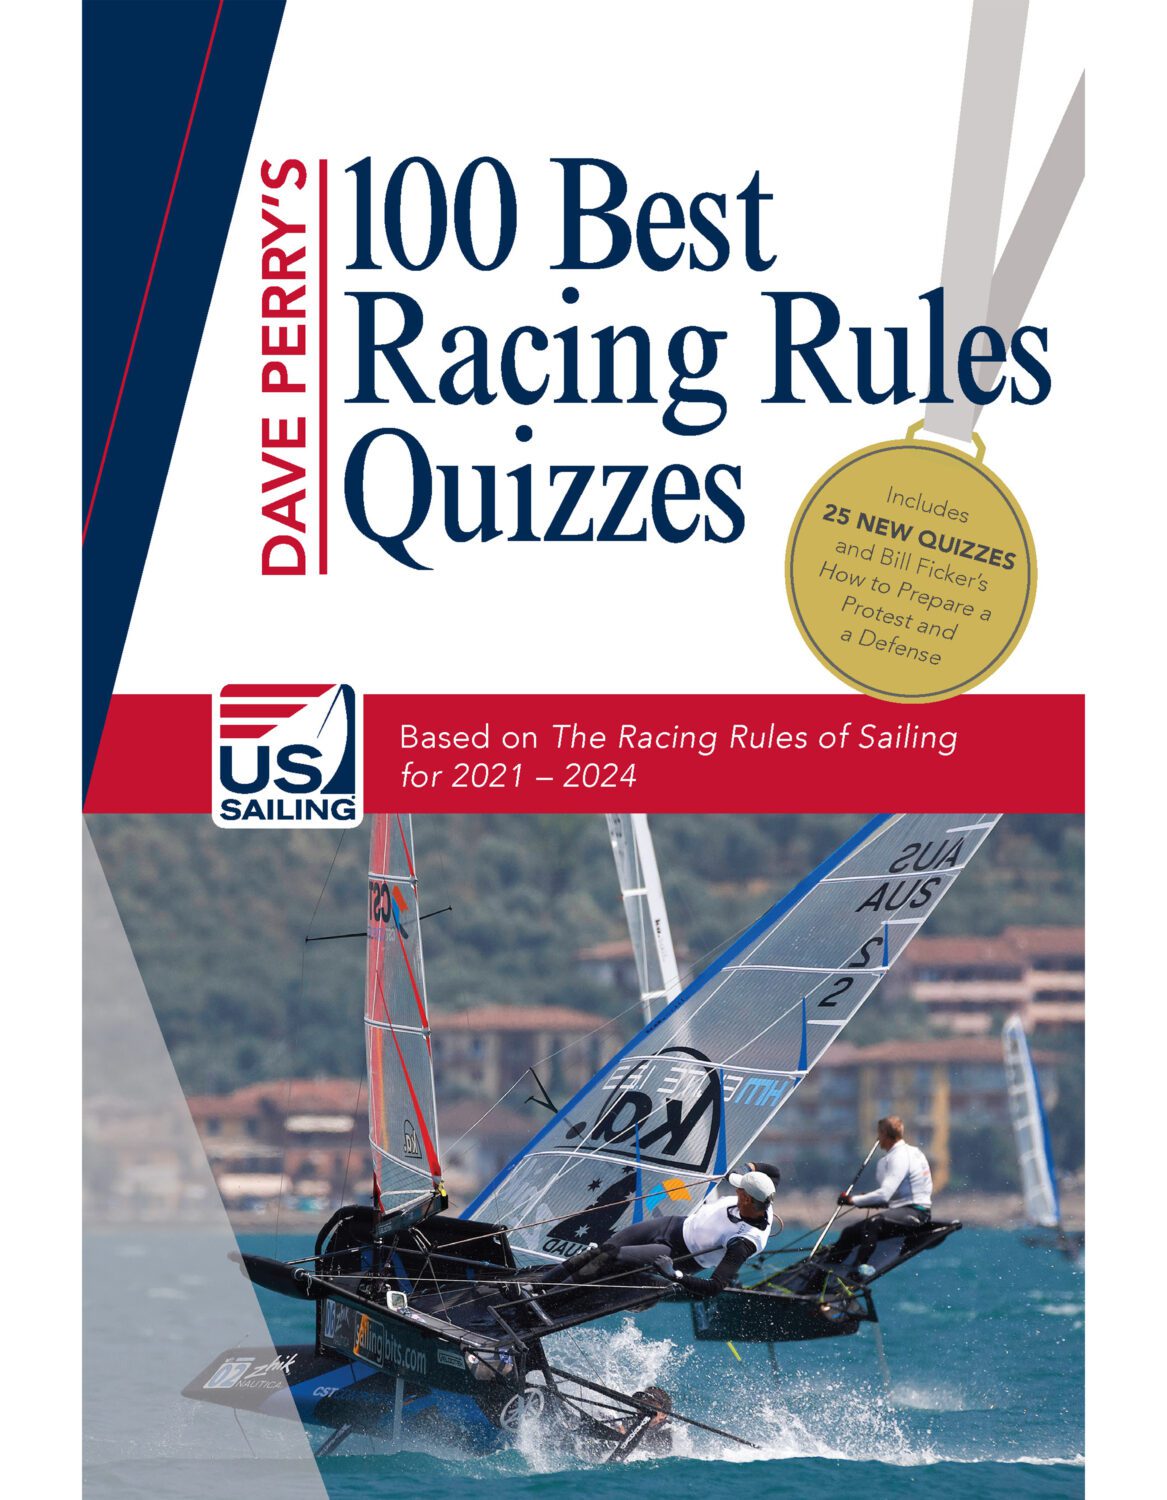 DAVE PERRY’S 100 Best Racing Rules Quizzes